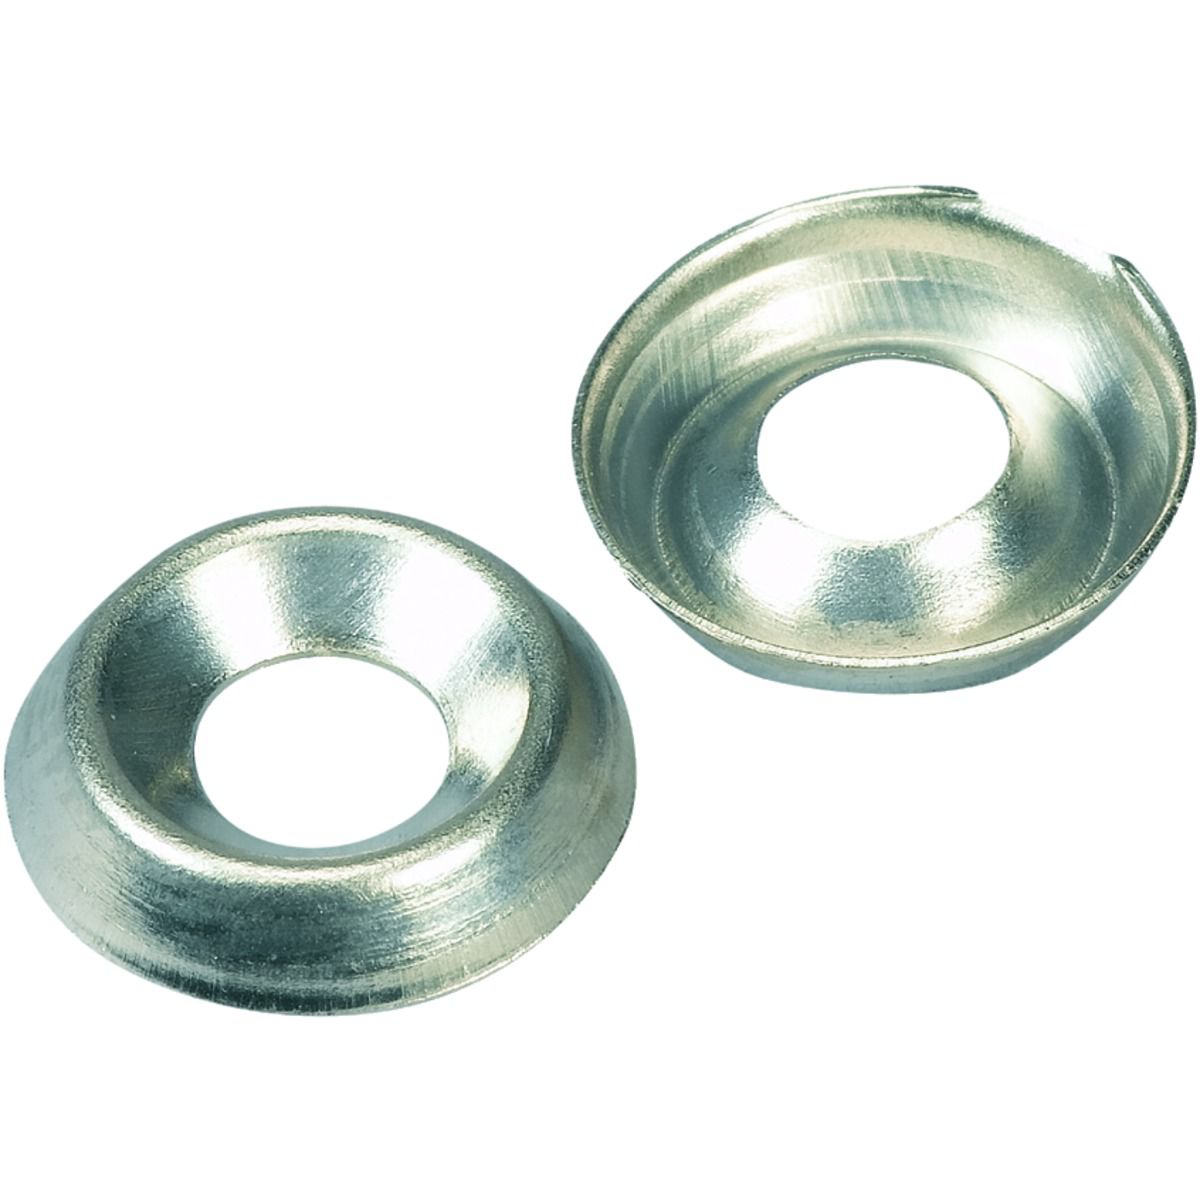 Image of Wickes Nickel Screw Cup Washers - No.10 Pack of 20